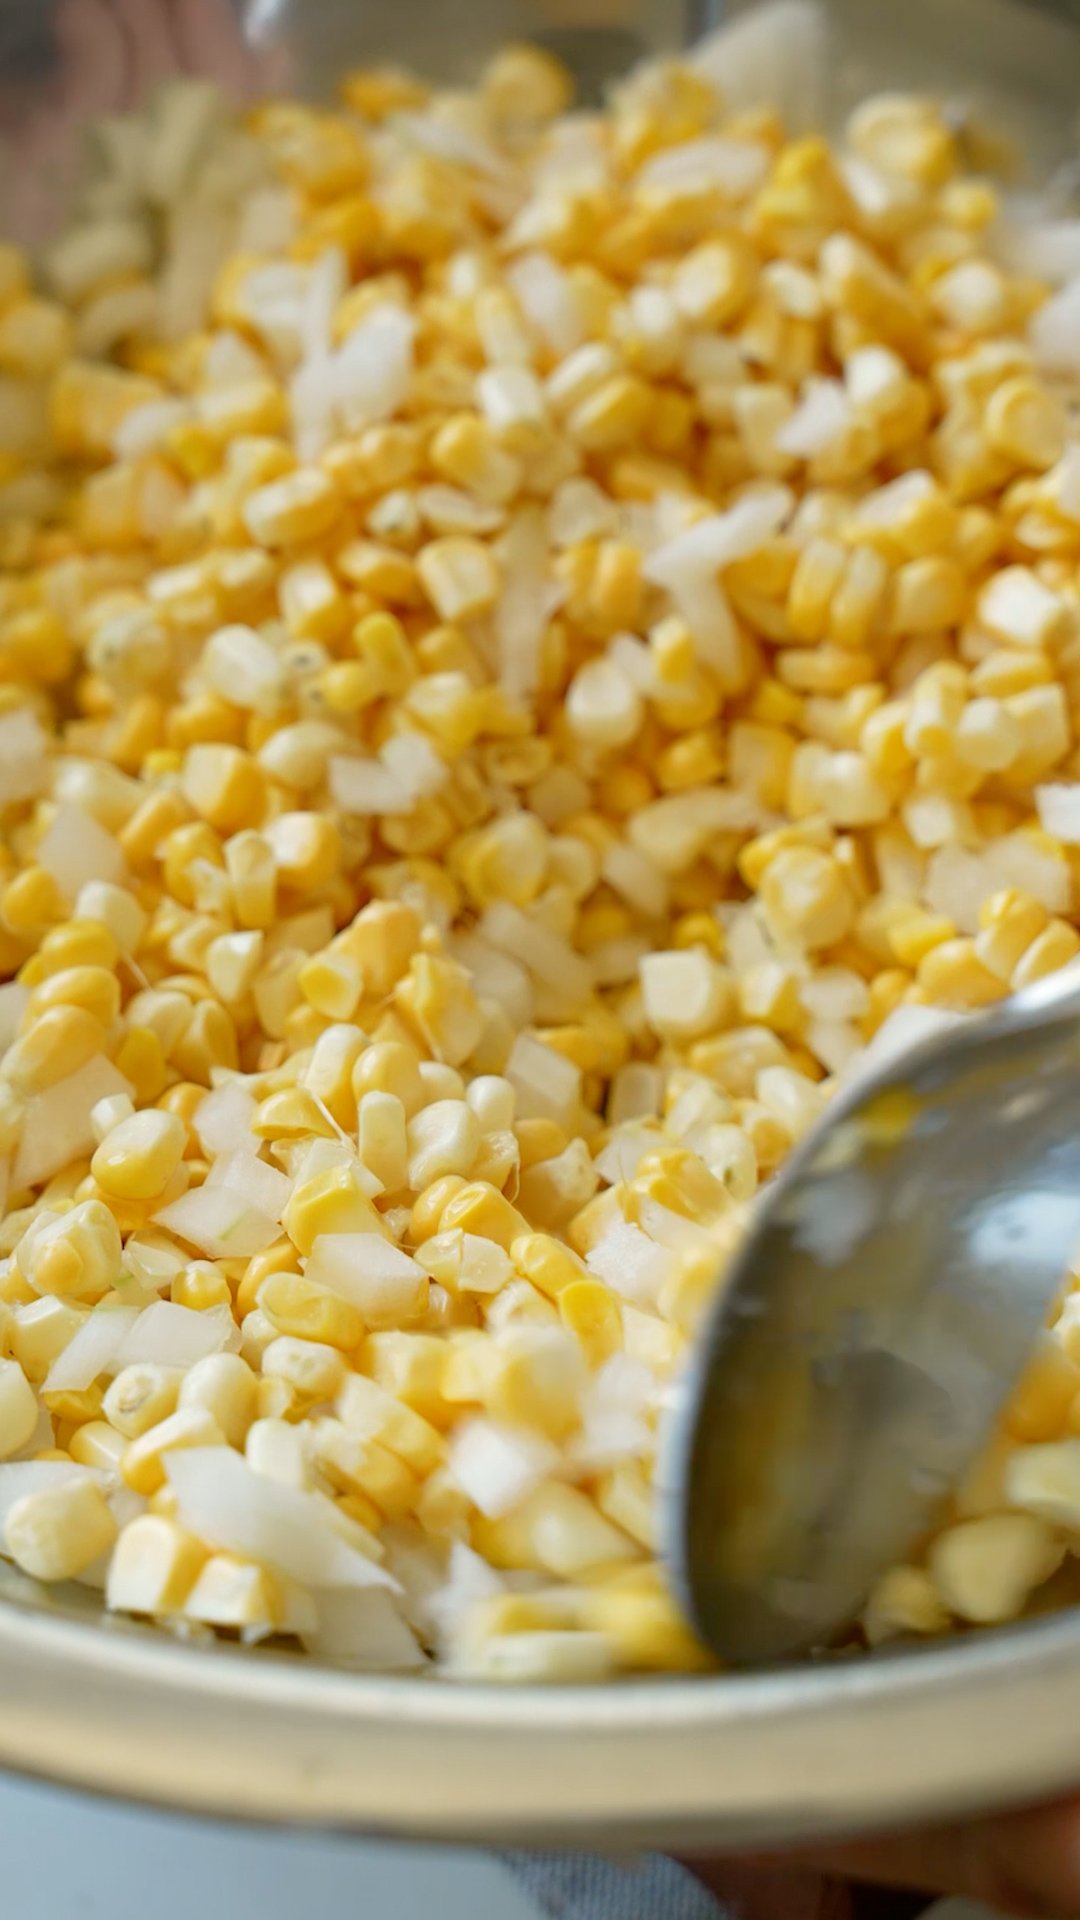 Mixing the corn and onion in a bowl.